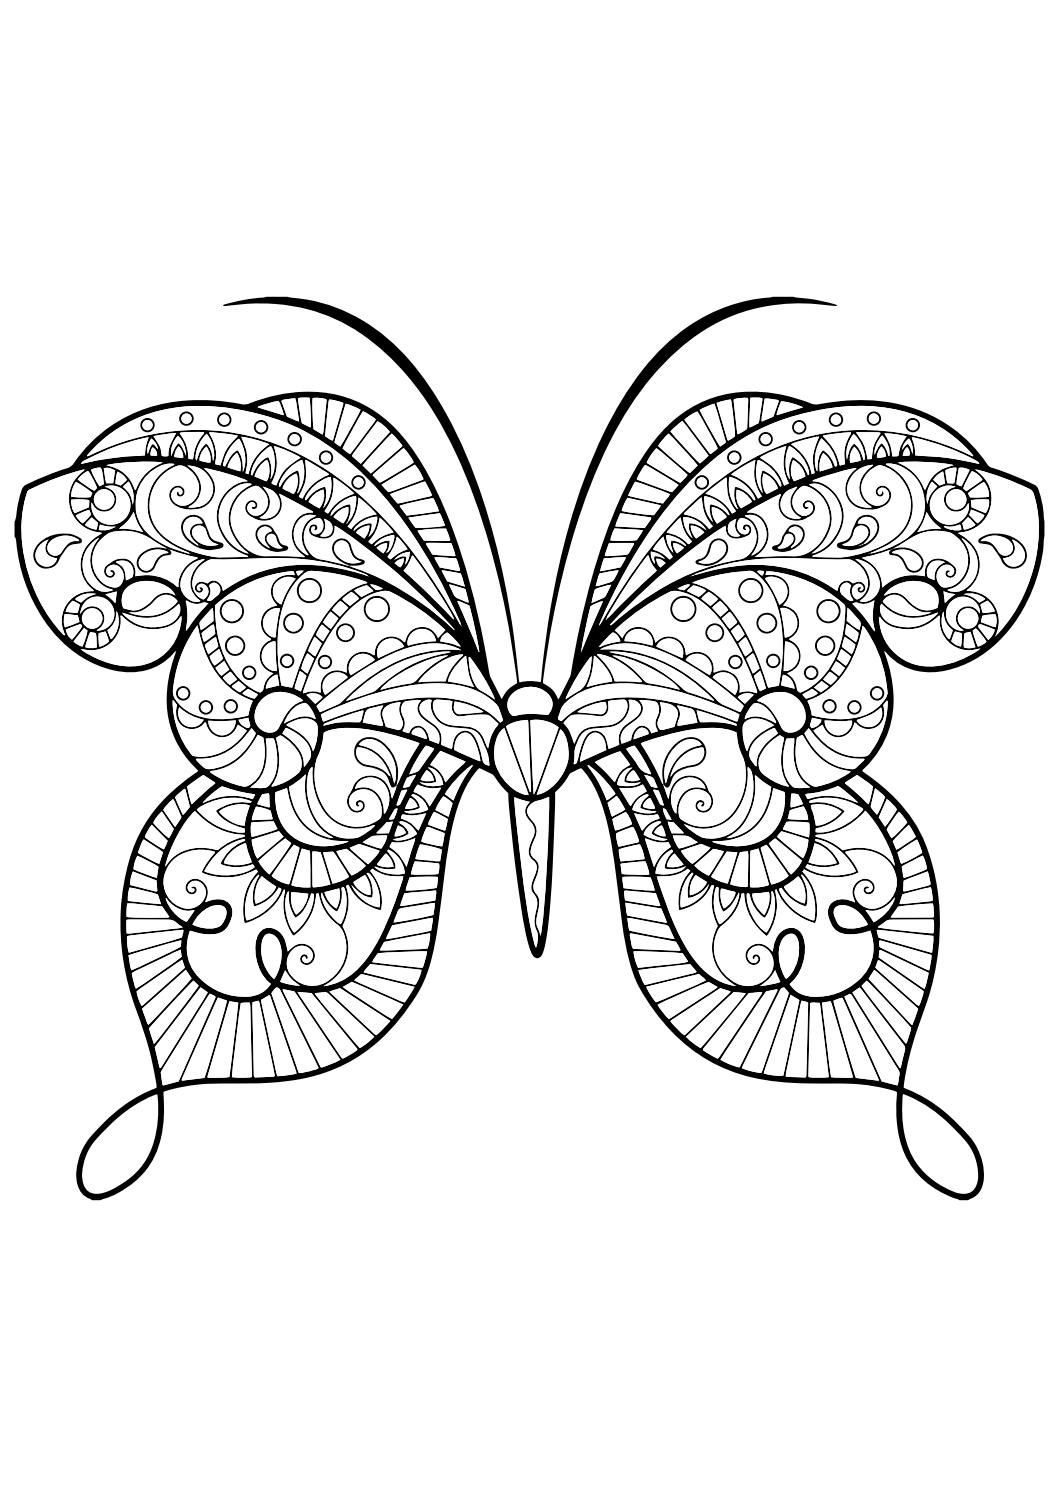 Butterfly Coloring Book For Adults
 Adult Butterfly Coloring Book